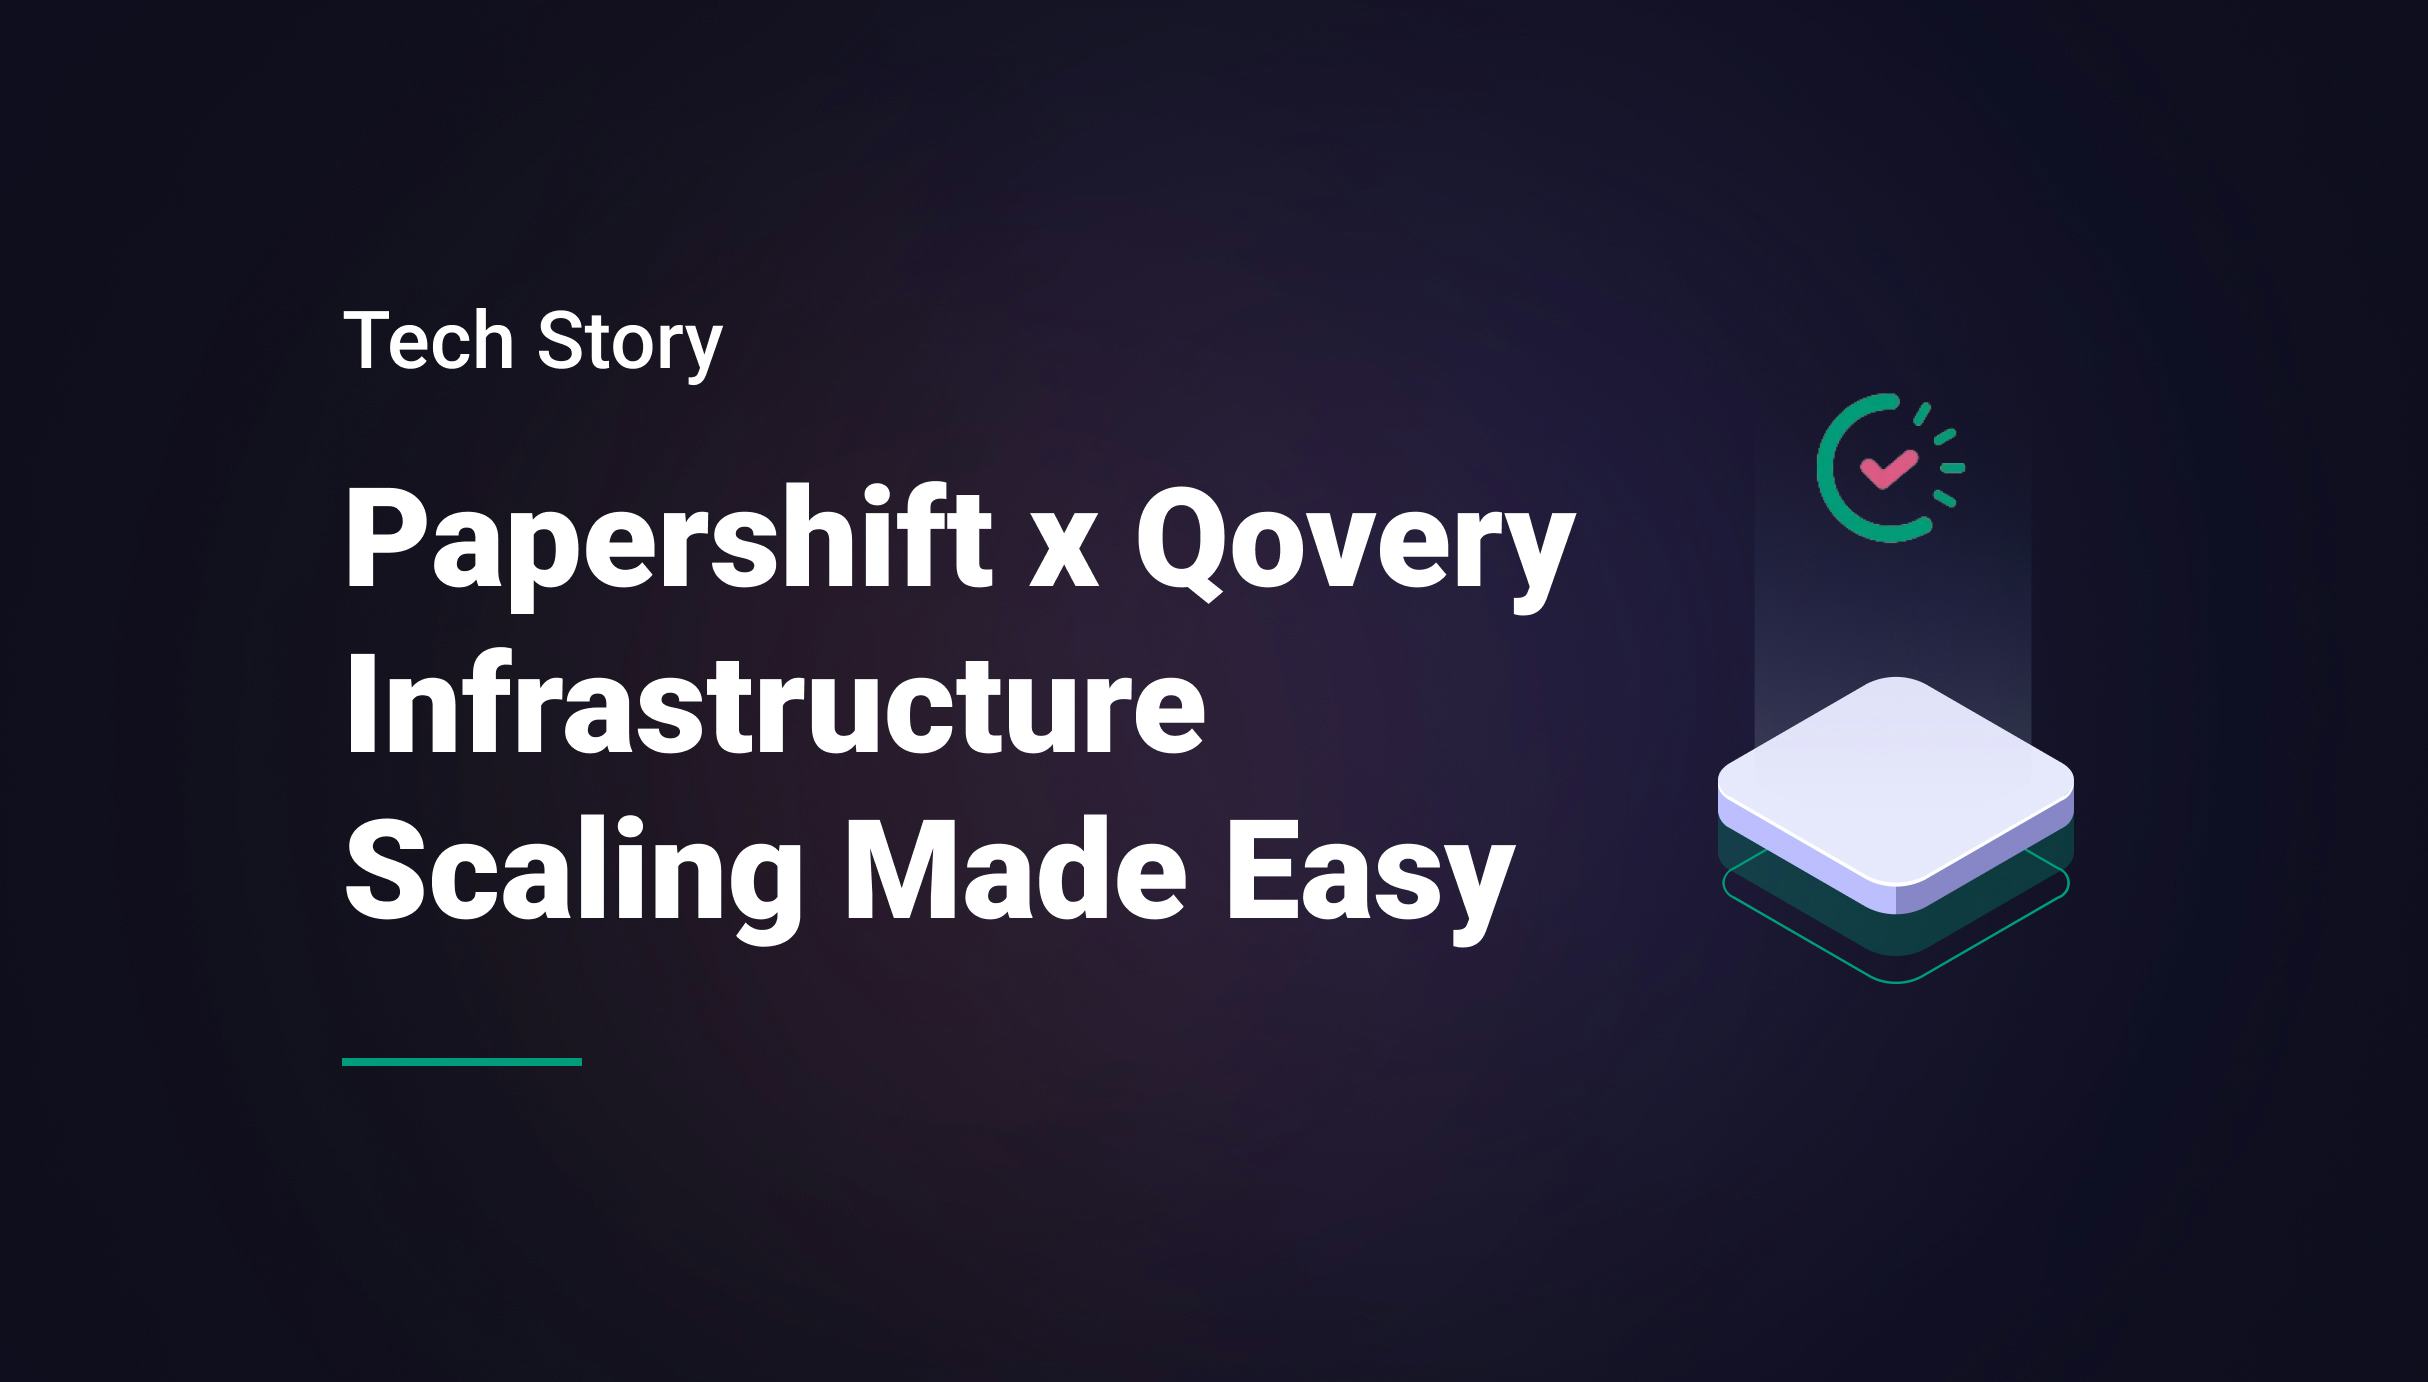 Tech Story: Papershift x Qovery Infrastructure Scaling Made Easy